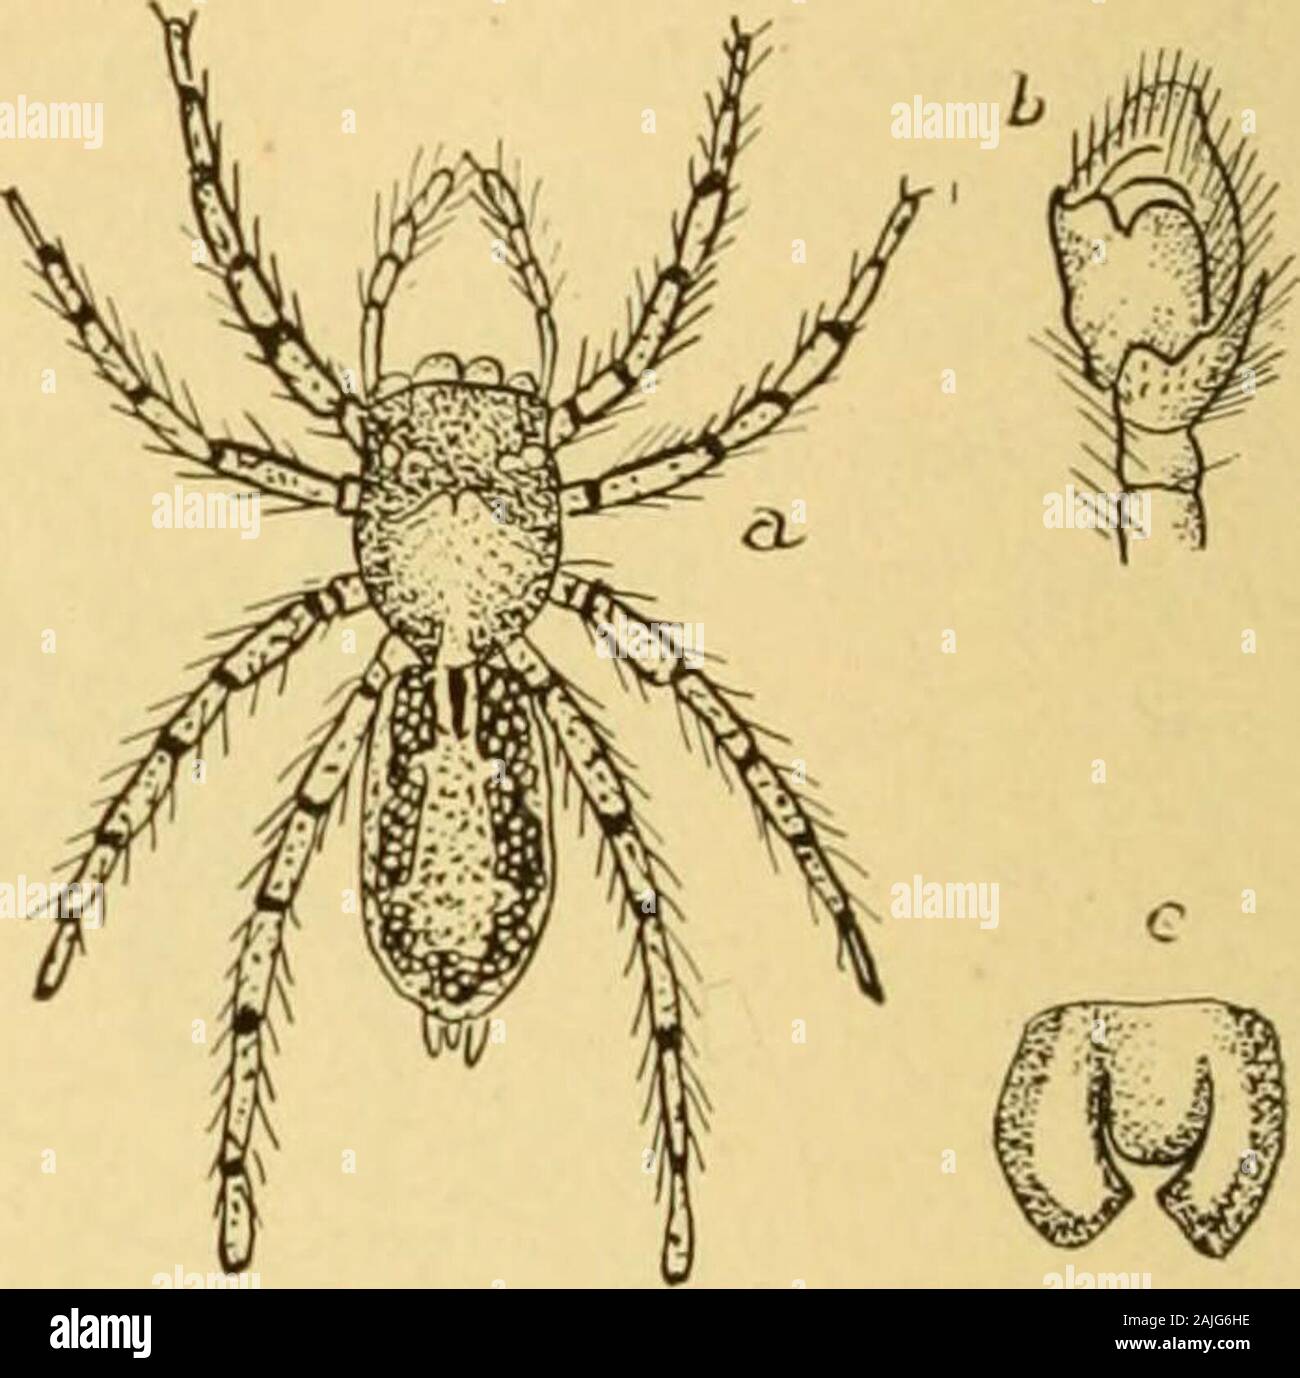 Transactions of the Connecticut Academy of Arts and Sciences . Figure 222.—Tapinattus melanognathus; a, dorsal view of body of male,xSyi; h, c, palpi of male; after Marx. Figure 223.—Plexippus Paykulli;a, dorsal view of female, x 2 ; 6, male palpus; c, epigynum ; after Marx. Plexippus Paykulli Aud. and ^?Lg.=3fene)nerus diversus Black.;Large Jumping Spider. Figures 223, a, h, c. Cephalothorax of male dark brown or blackish, with a medianstreak of dull reddish brown or tawny, not reaching forward to theeyes; abdomen mottled with dark brown and gray; legs darktawny brown, covered with conspicu Stock Photo